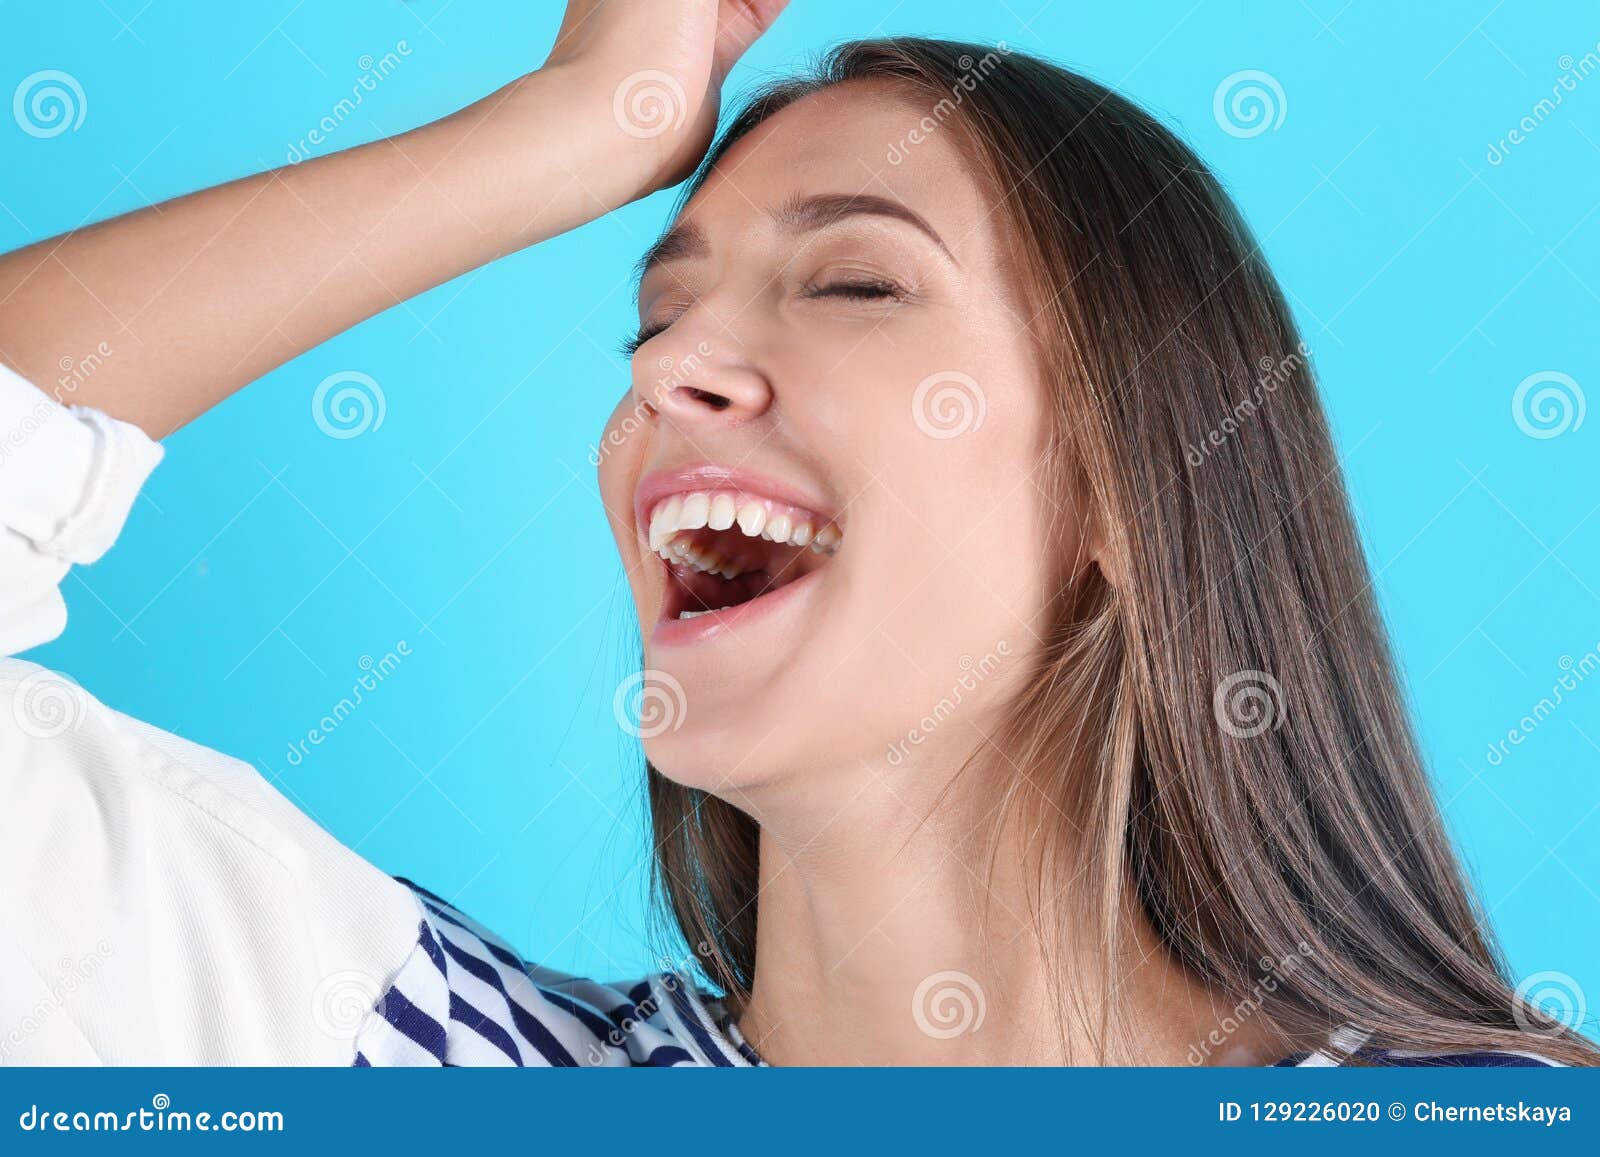 portrait of beautiful young woman bursting into laughter